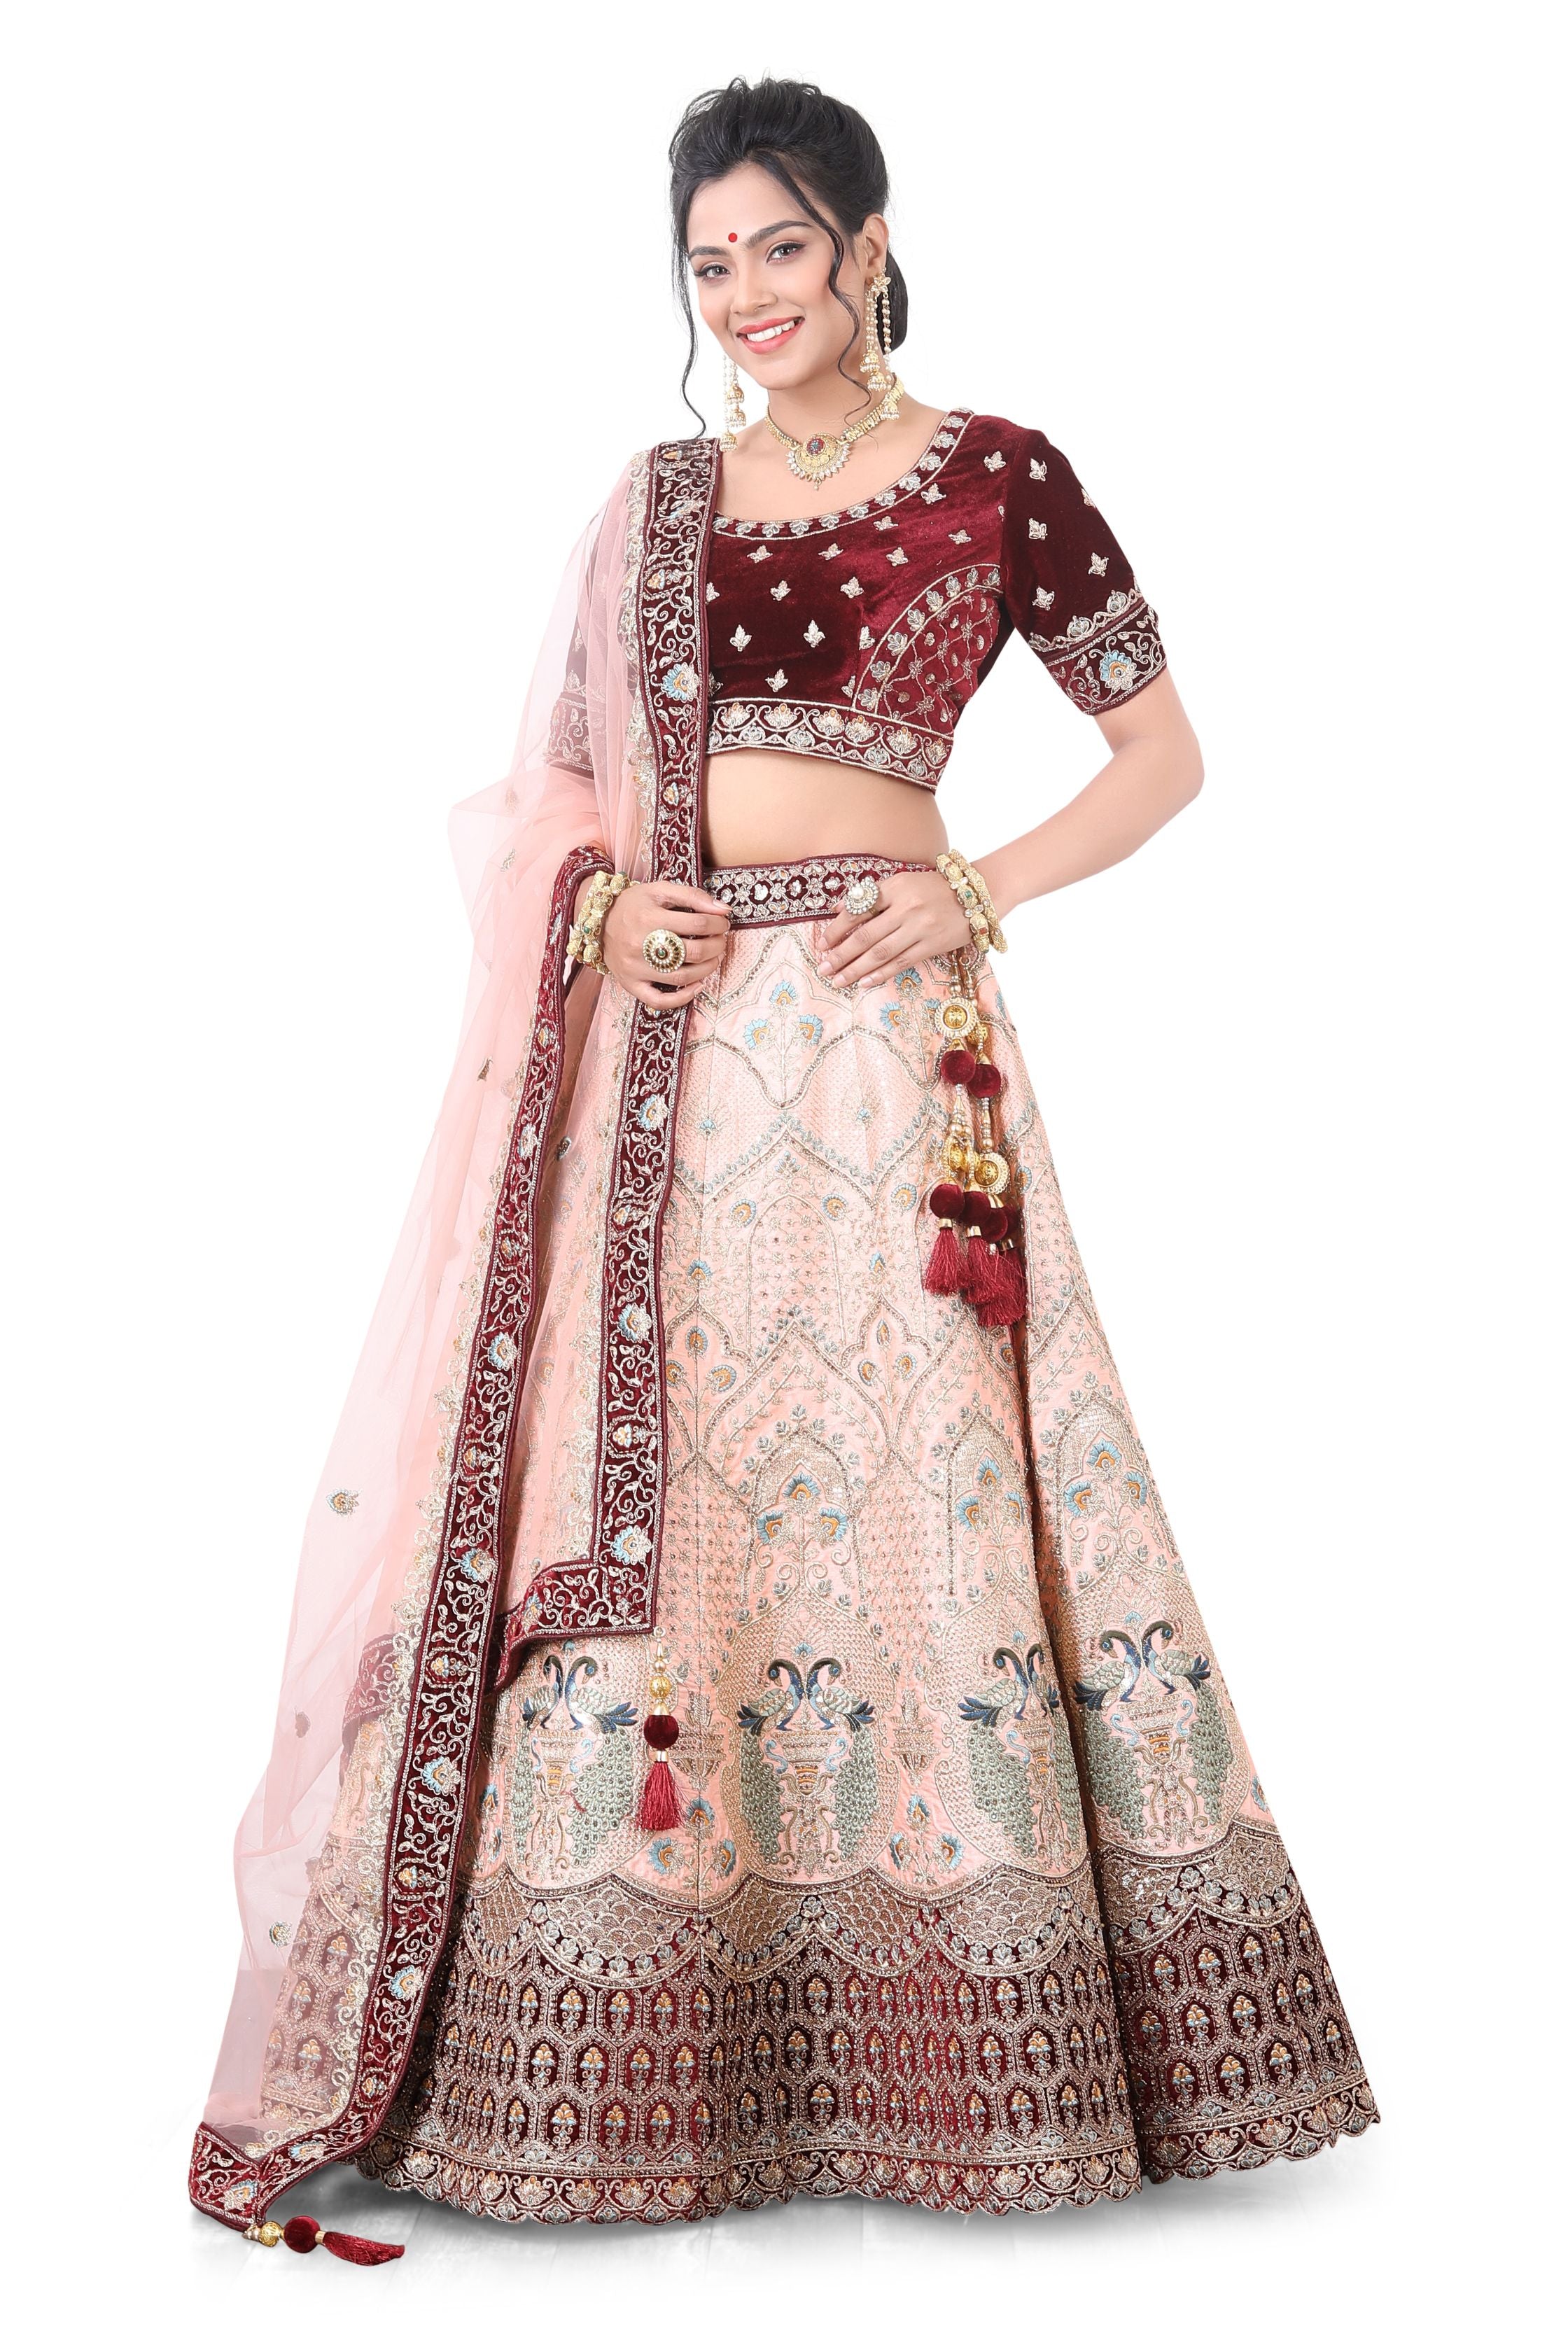 Silk Bridal Lehenga Choli in Maroon with Light pink Color-D No.5